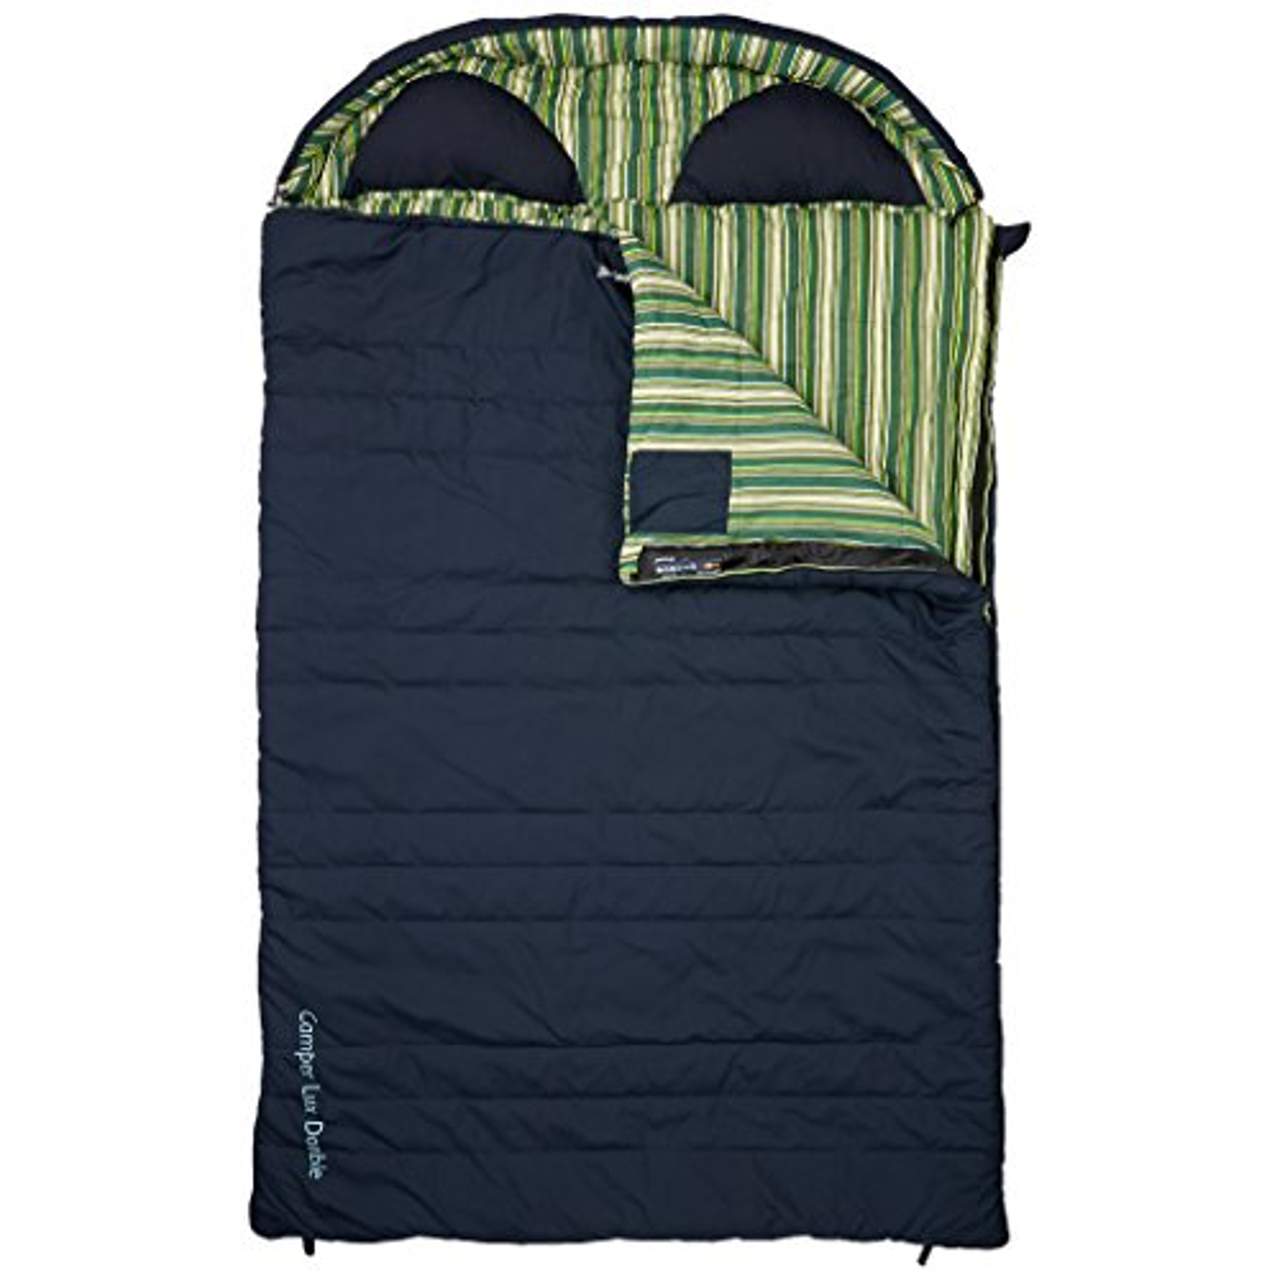 Relags Outwell Schlafsack 'Camper'